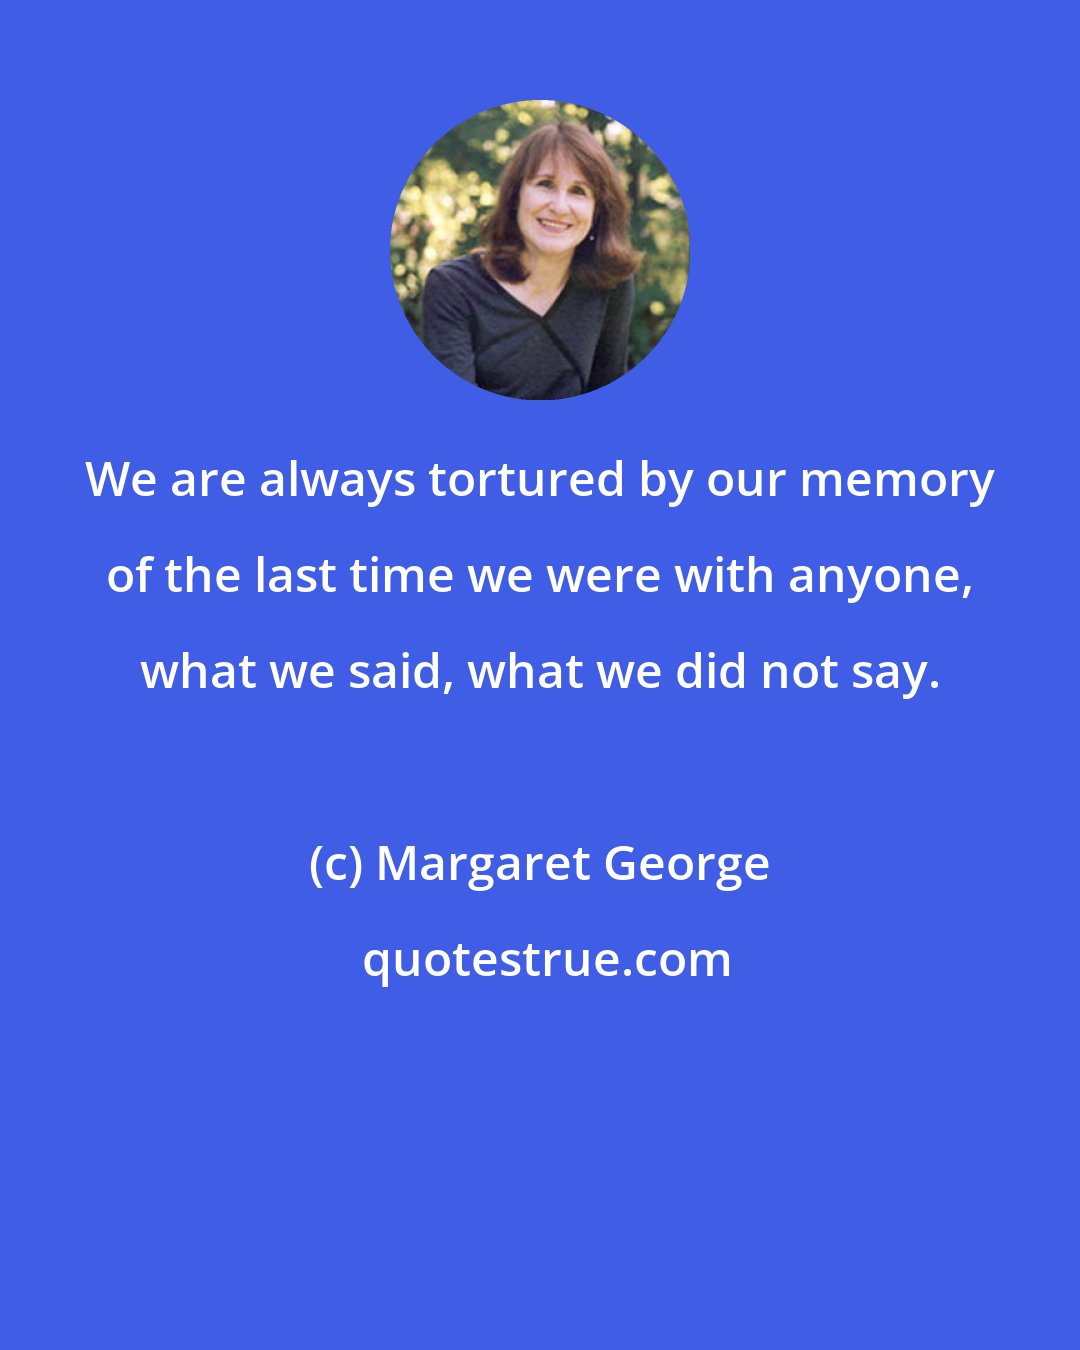 Margaret George: We are always tortured by our memory of the last time we were with anyone, what we said, what we did not say.